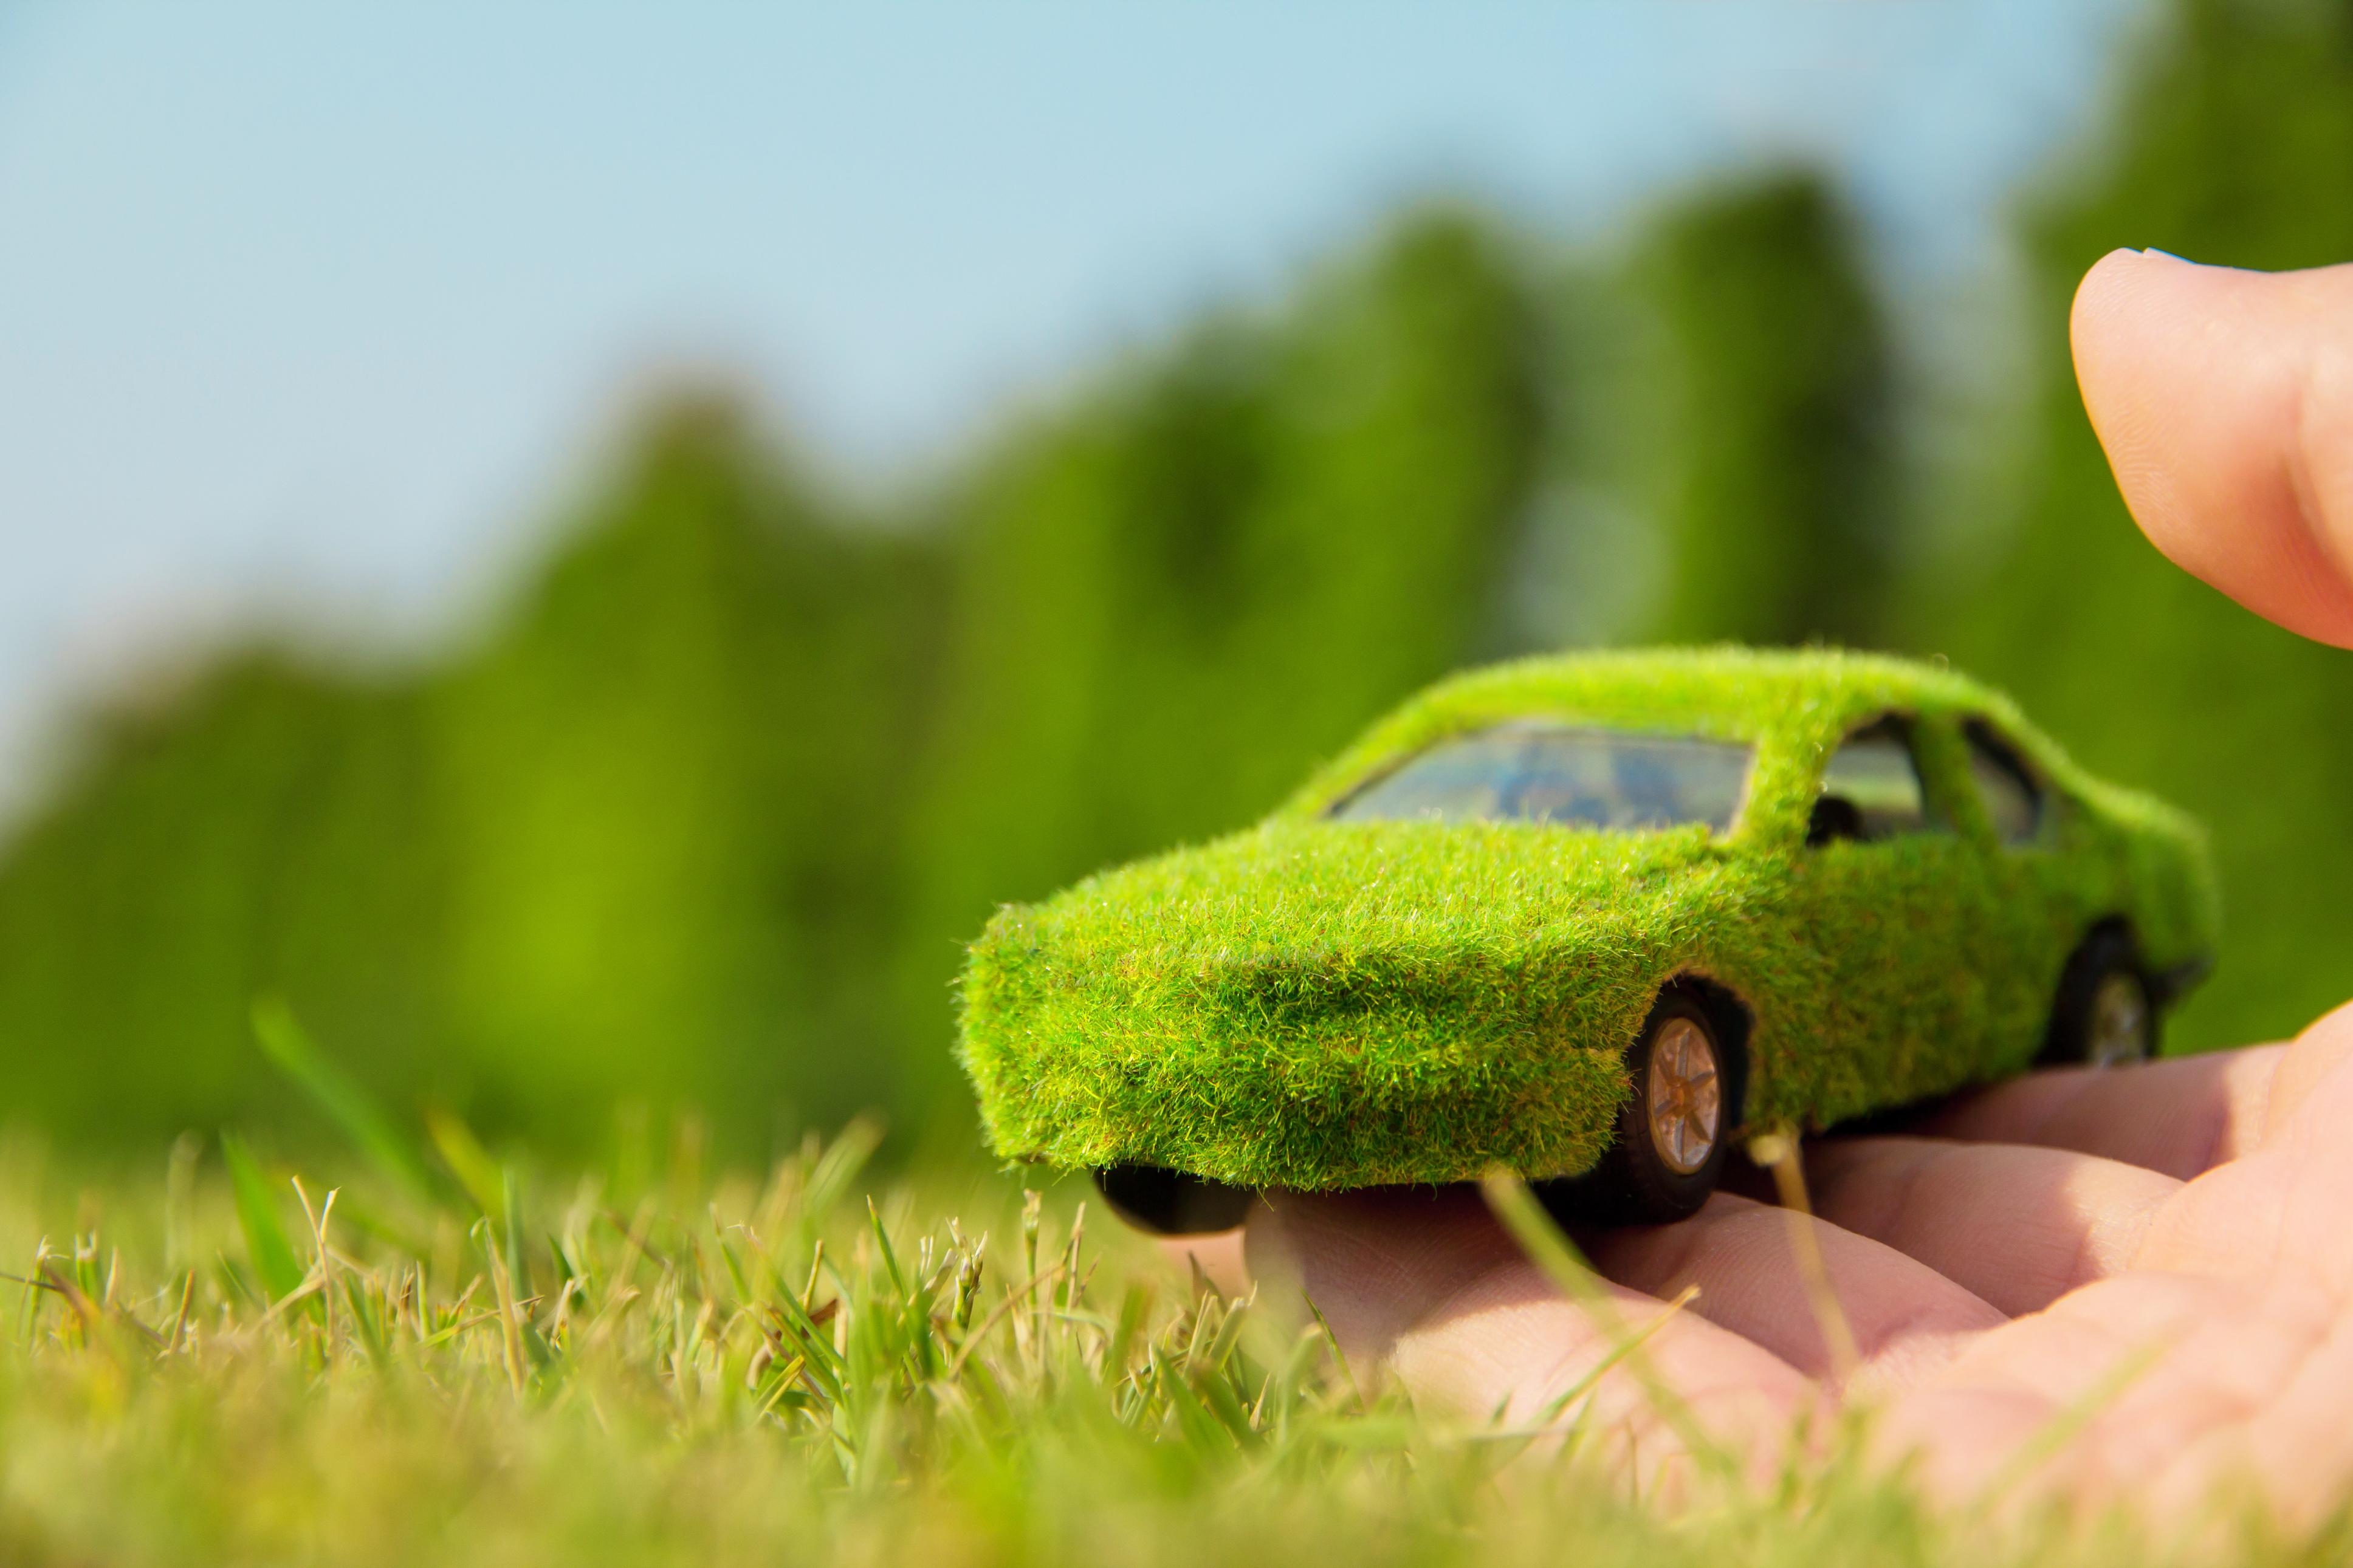 Are Hybrid Vehicles Better For The Environment